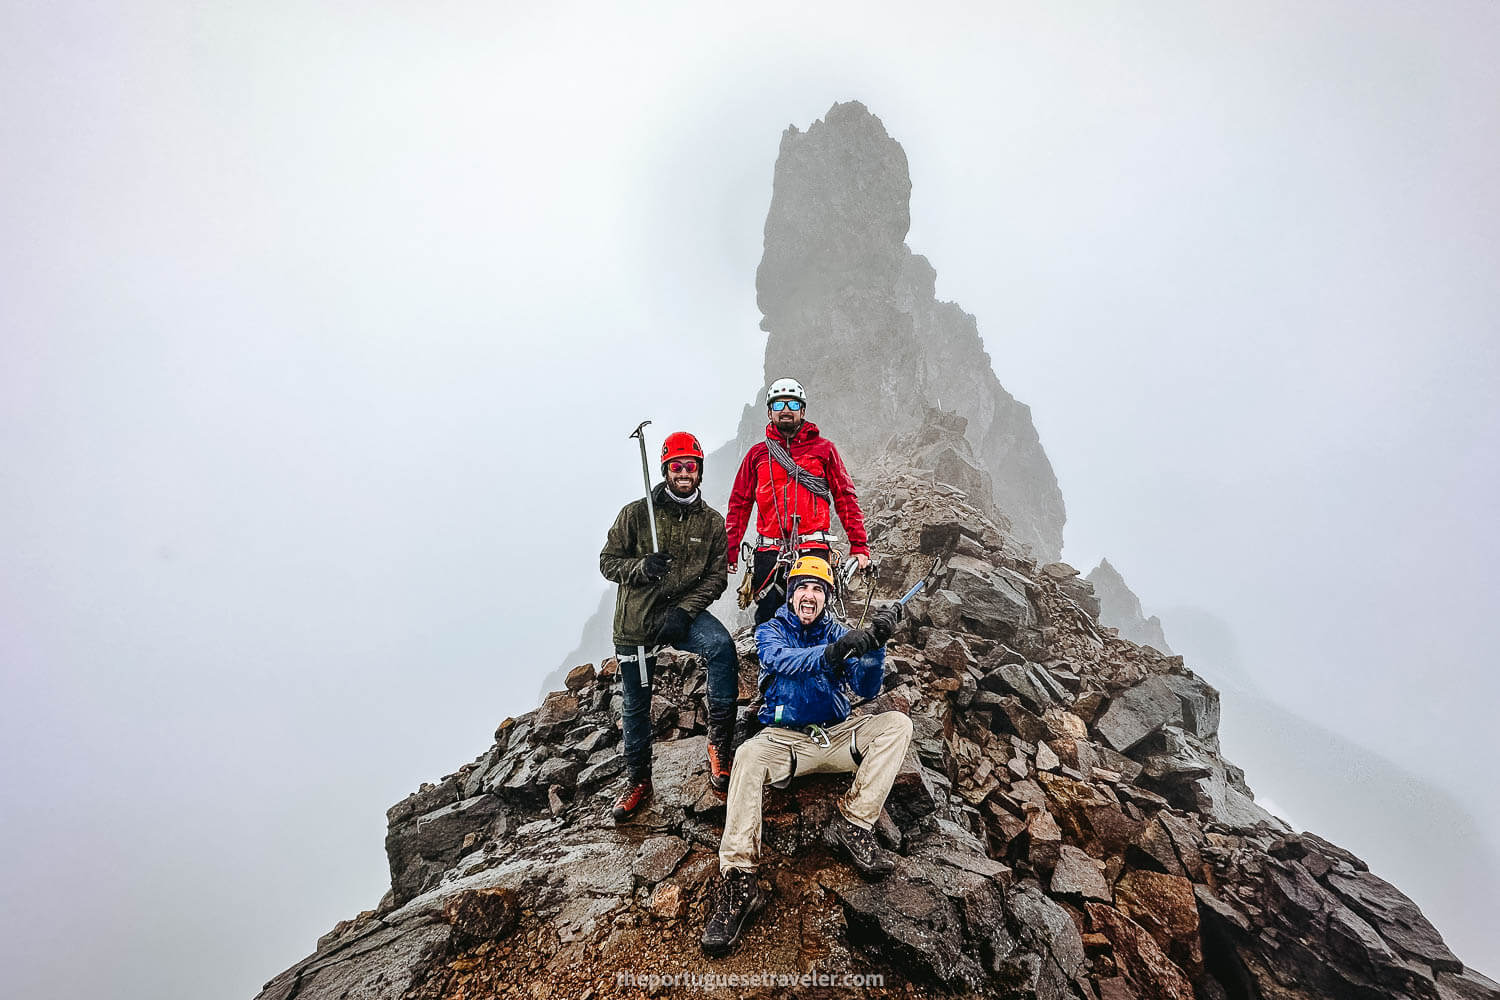 The guys at the summit of Carihuairazo Summit